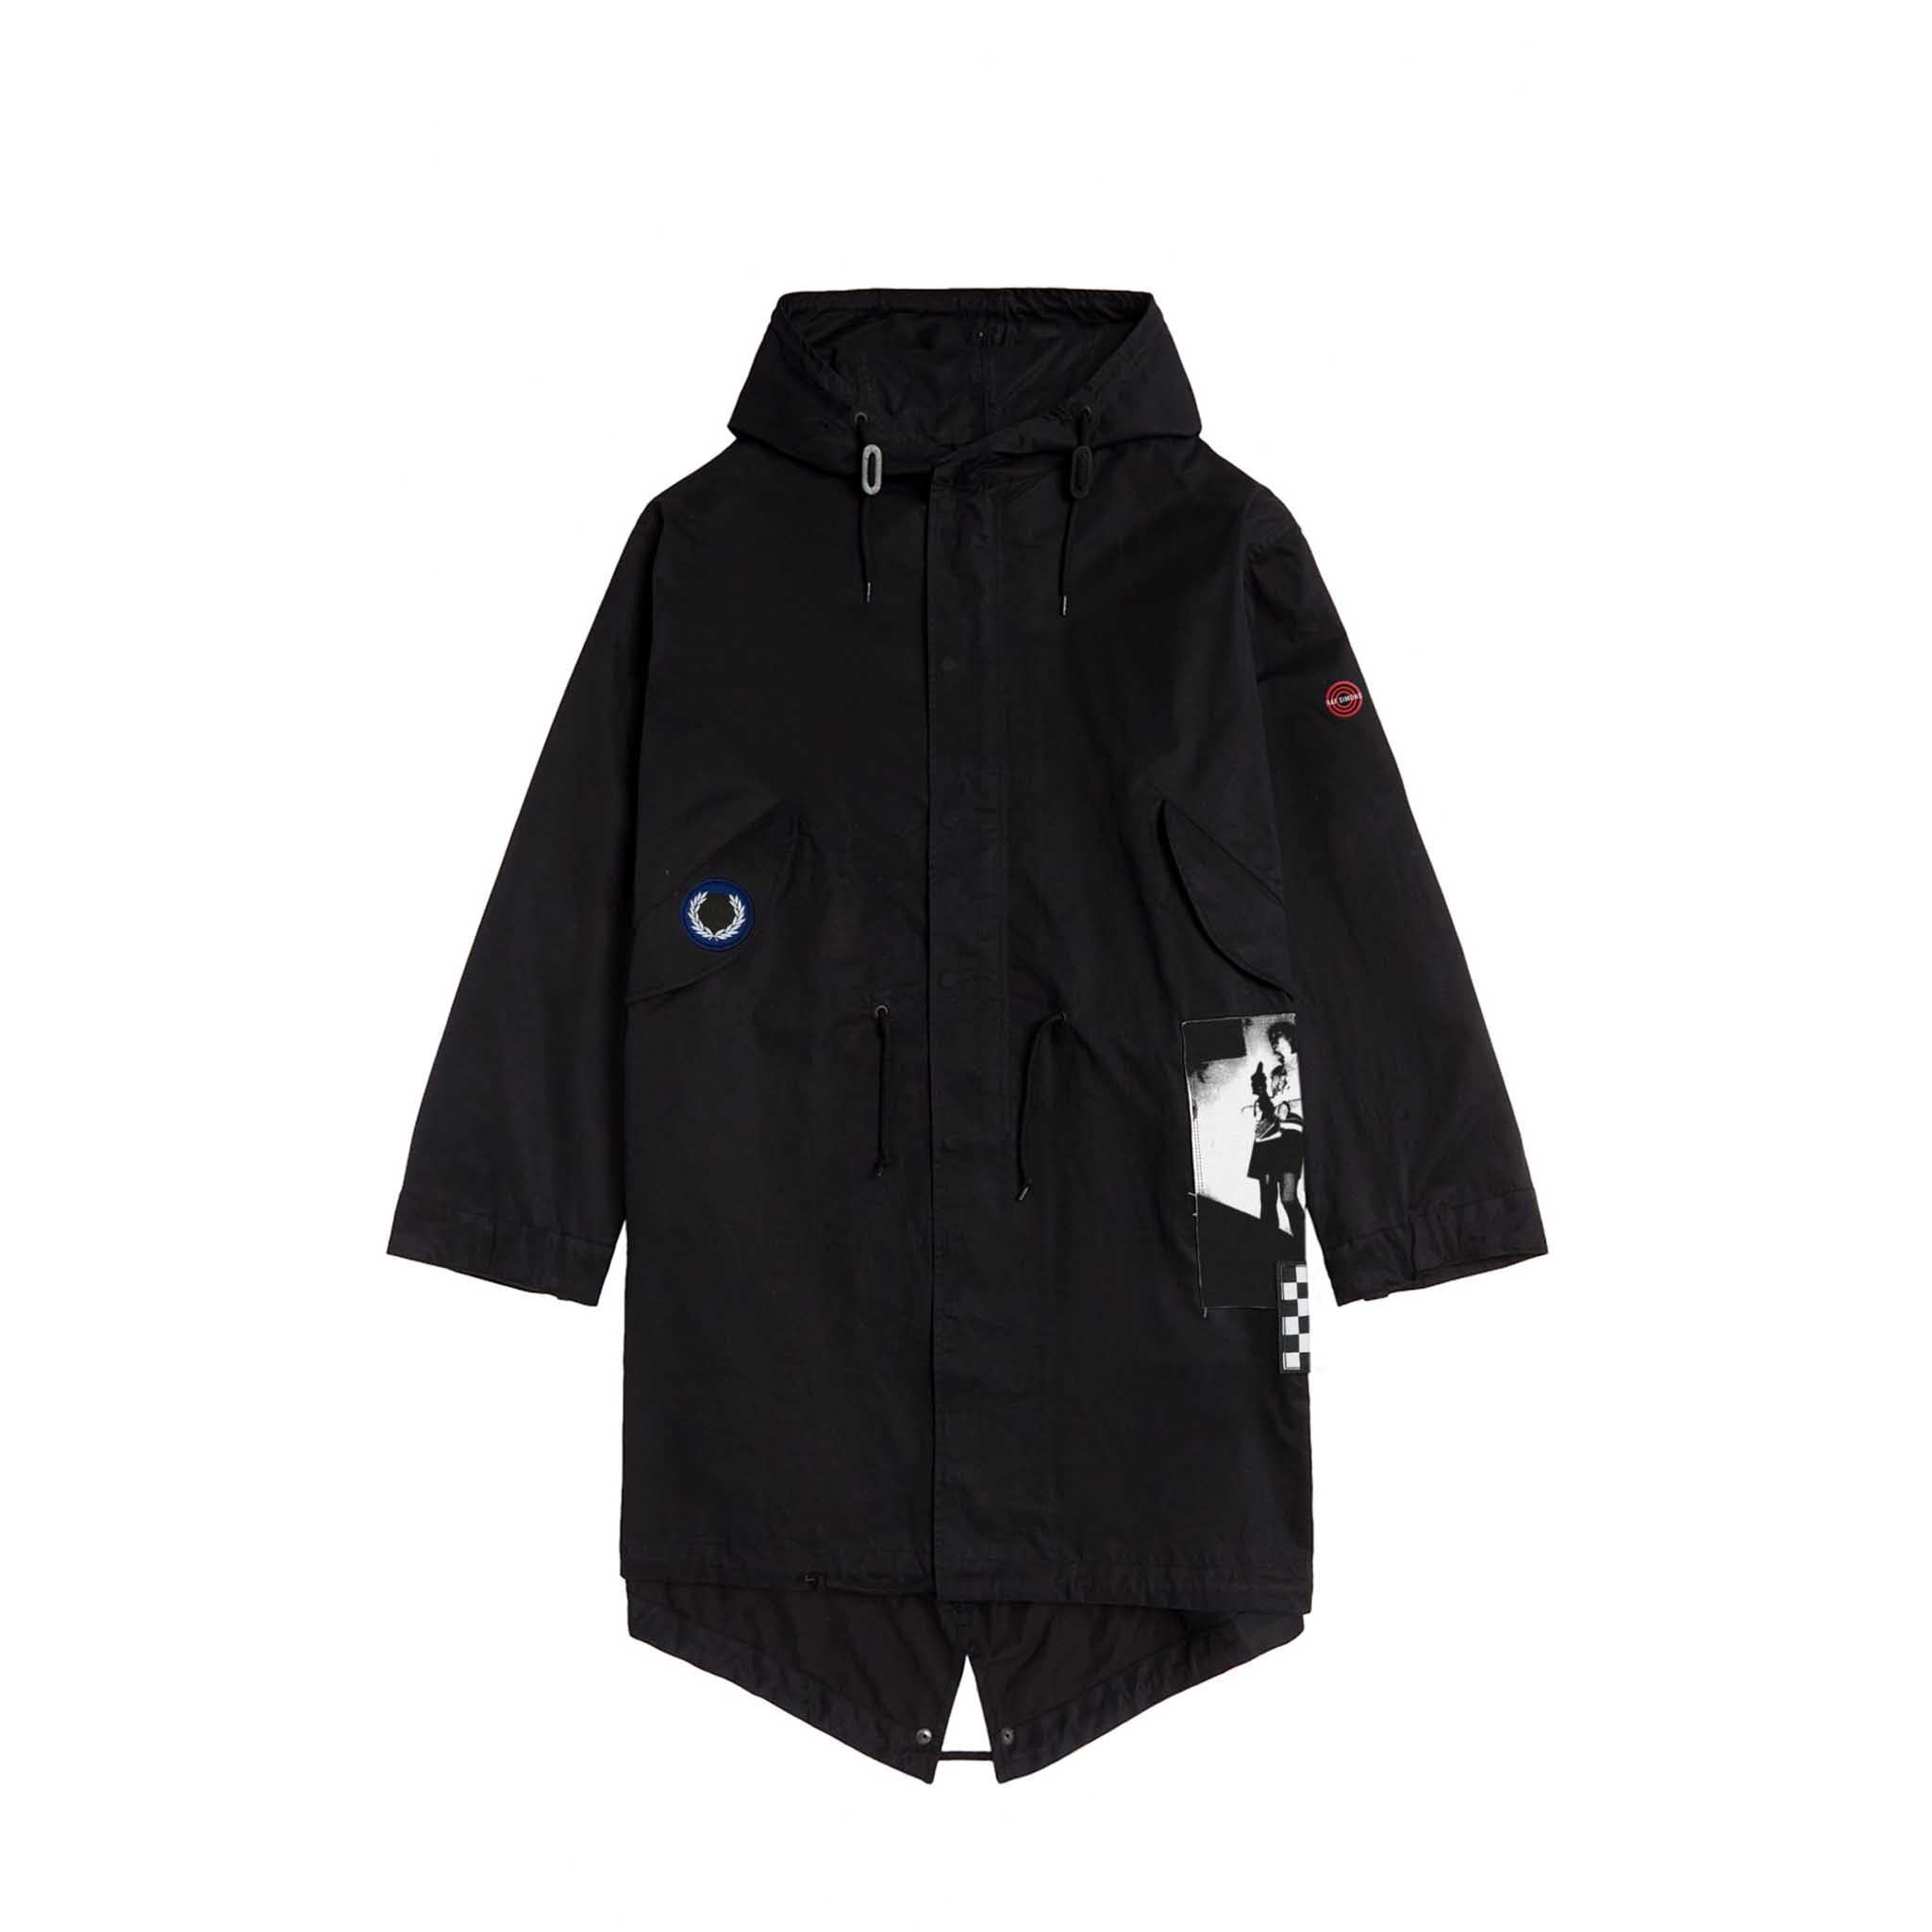 Fred Perry x Raf Simons Unlined Parka Black & SNEAKERBOX